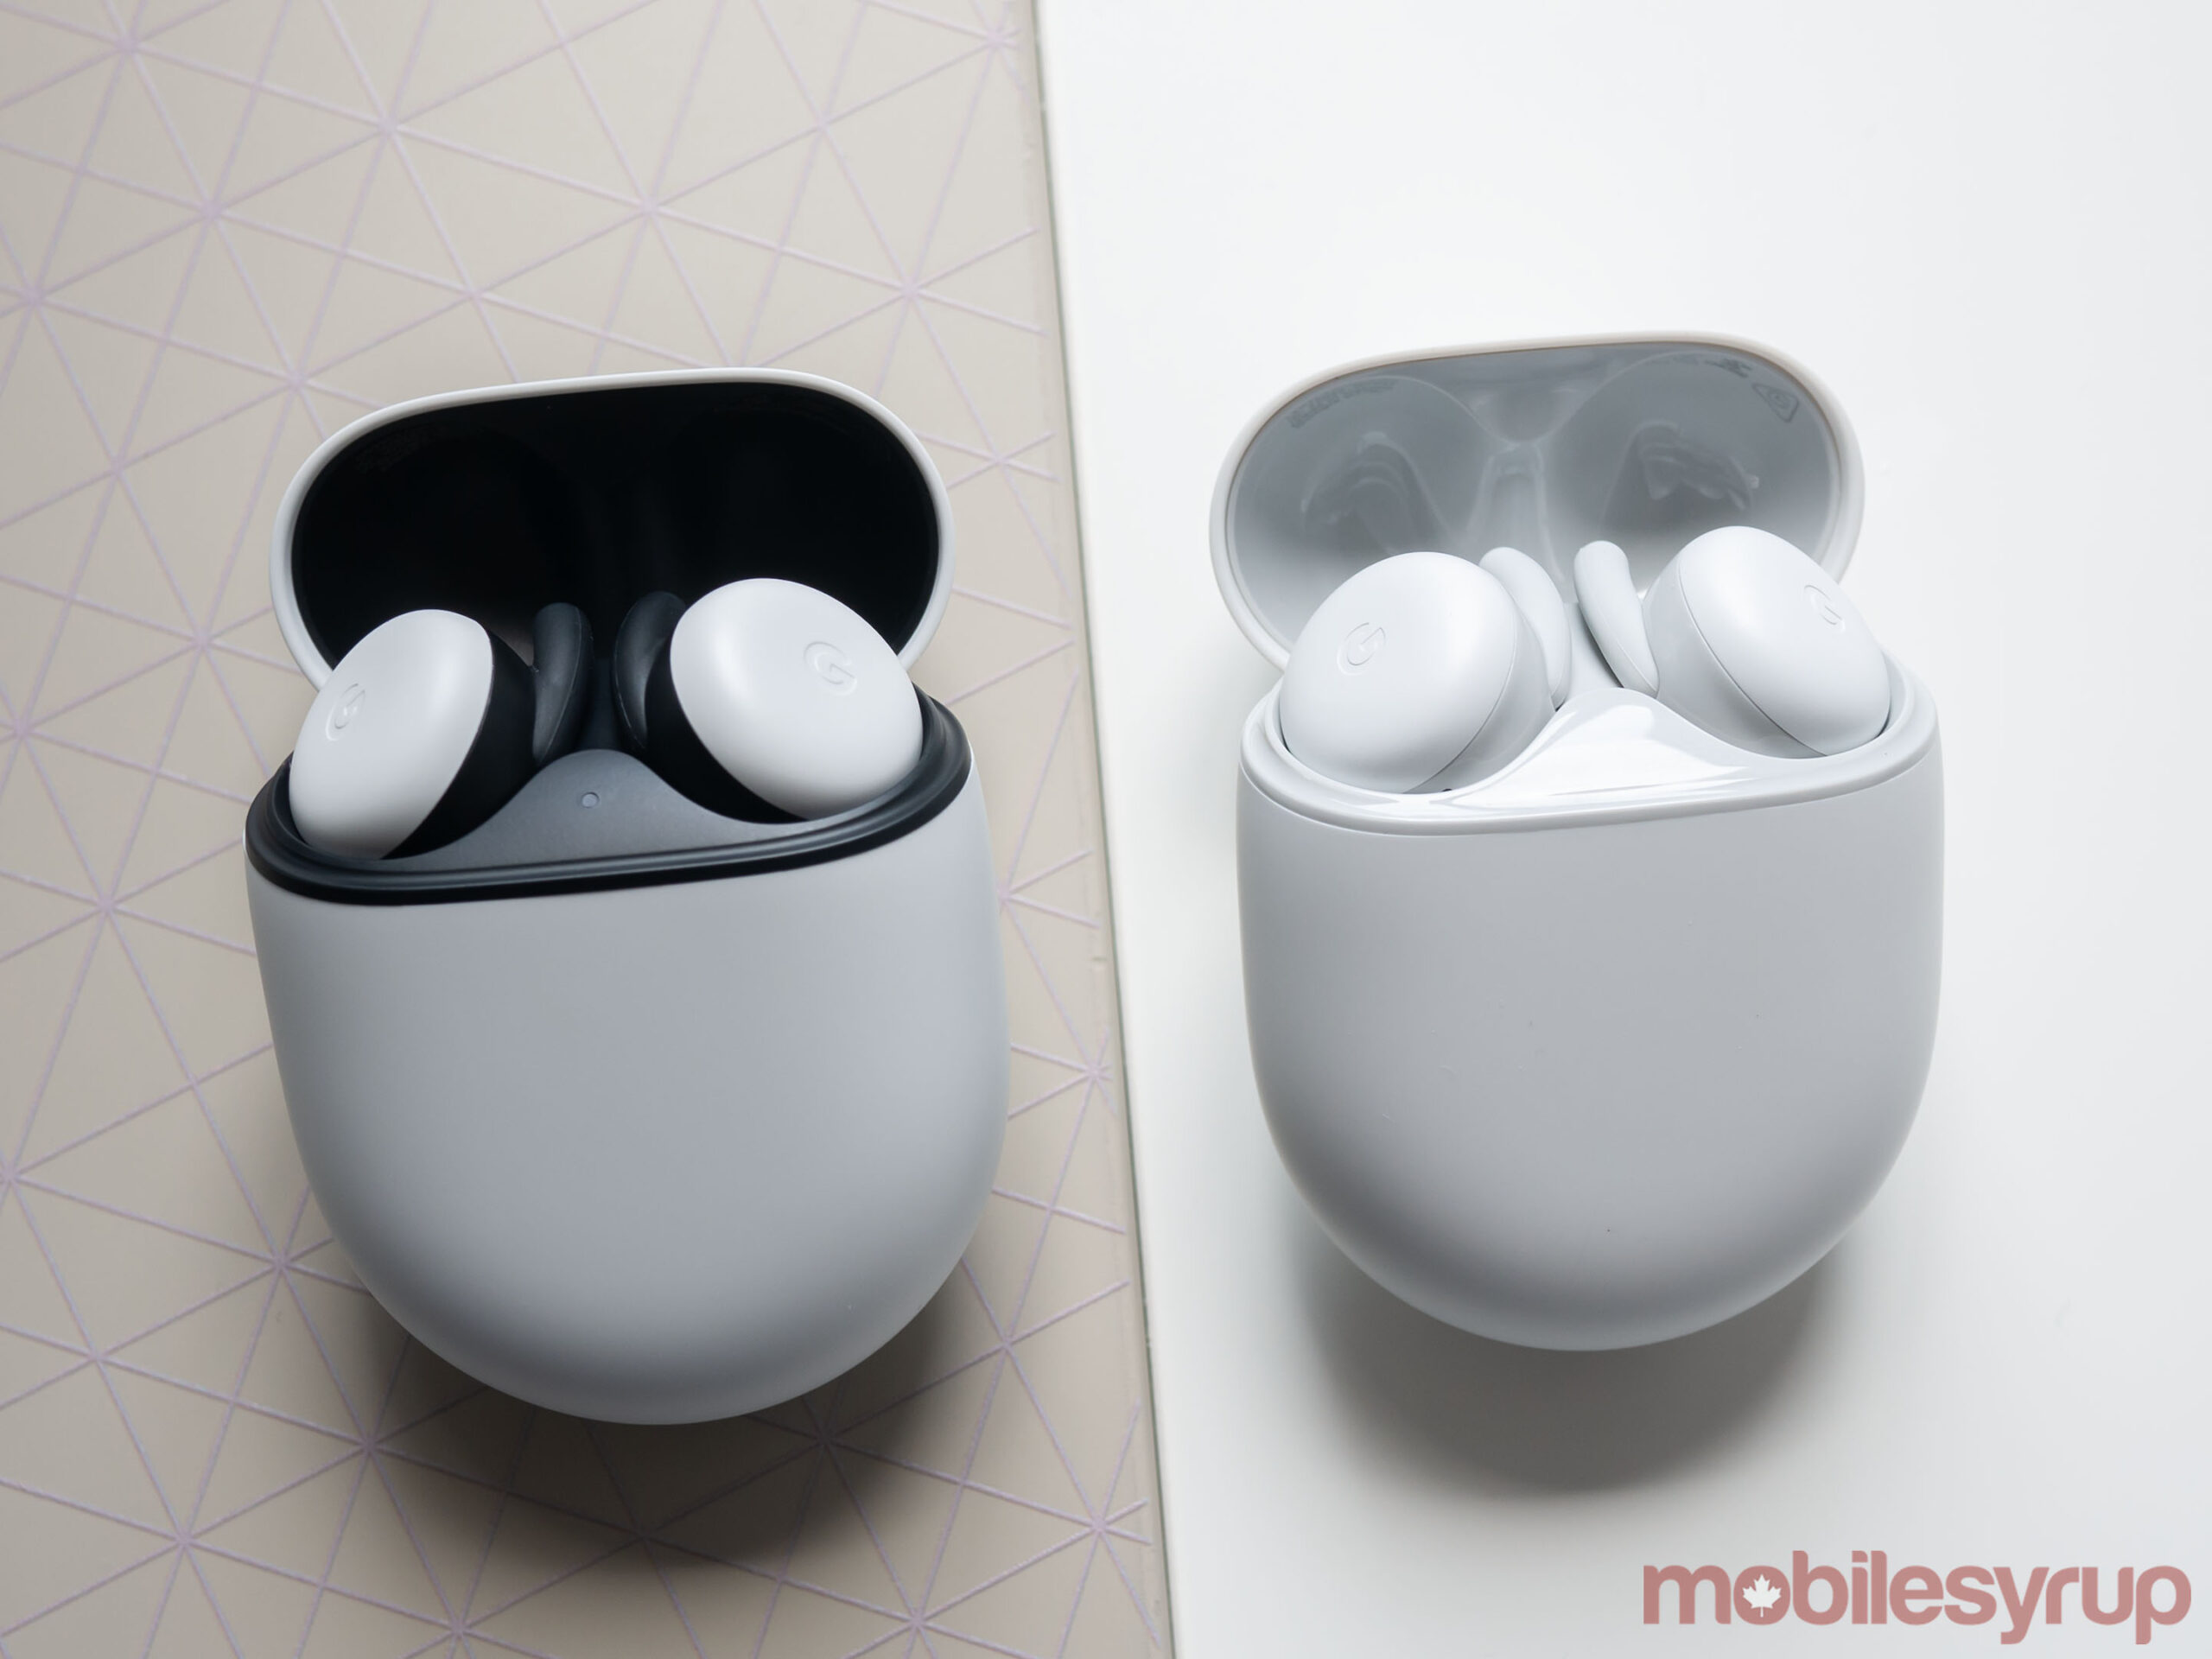 Pixel Buds (2020) beside the Pixel Buds Series-A